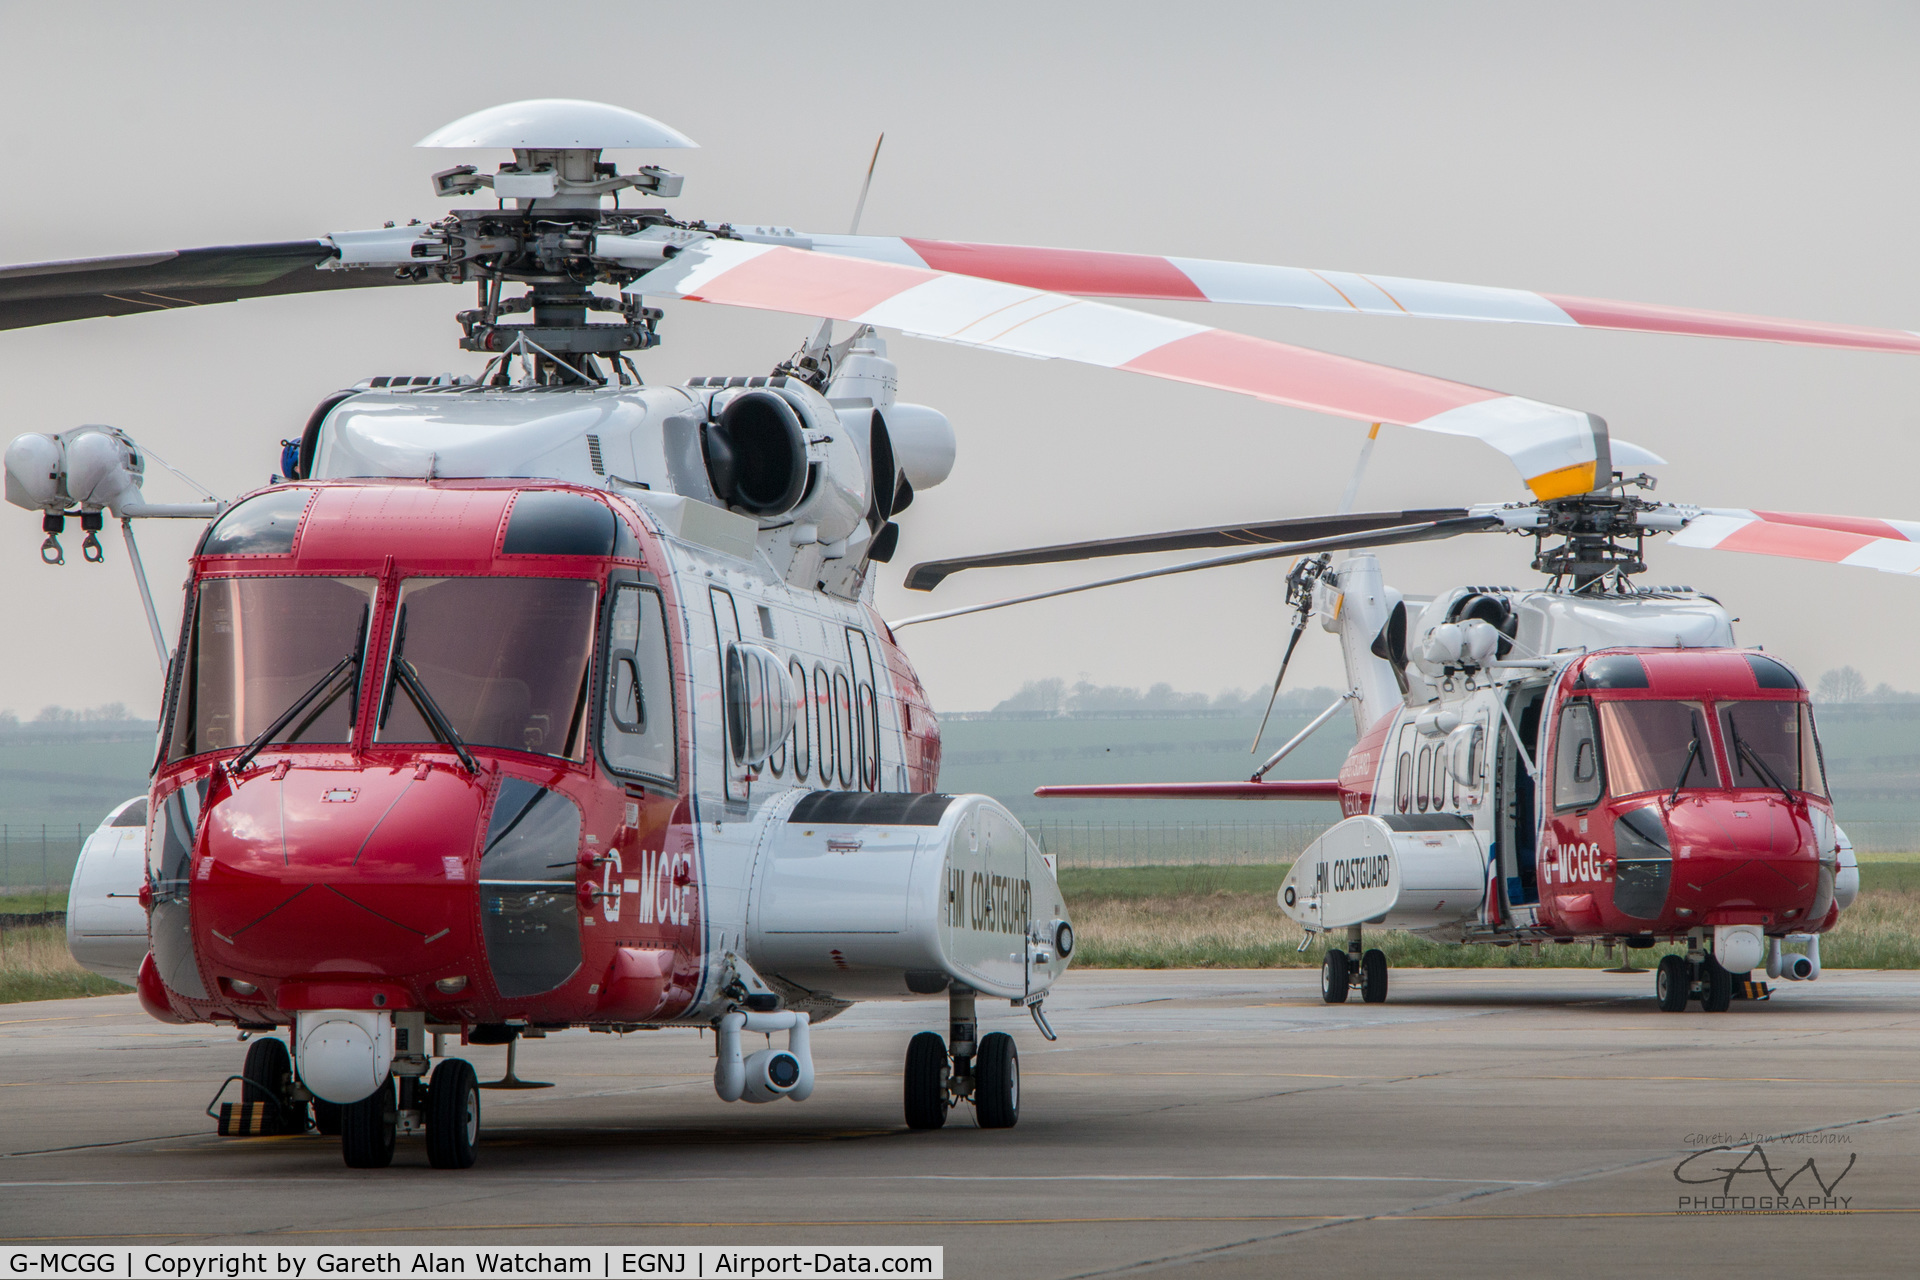 G-MCGG, 2014 Sikorsky S-92A C/N 920225, G-MCGG and G-MCGE on the pan together at Humberside
*G-MCGG temporarily based